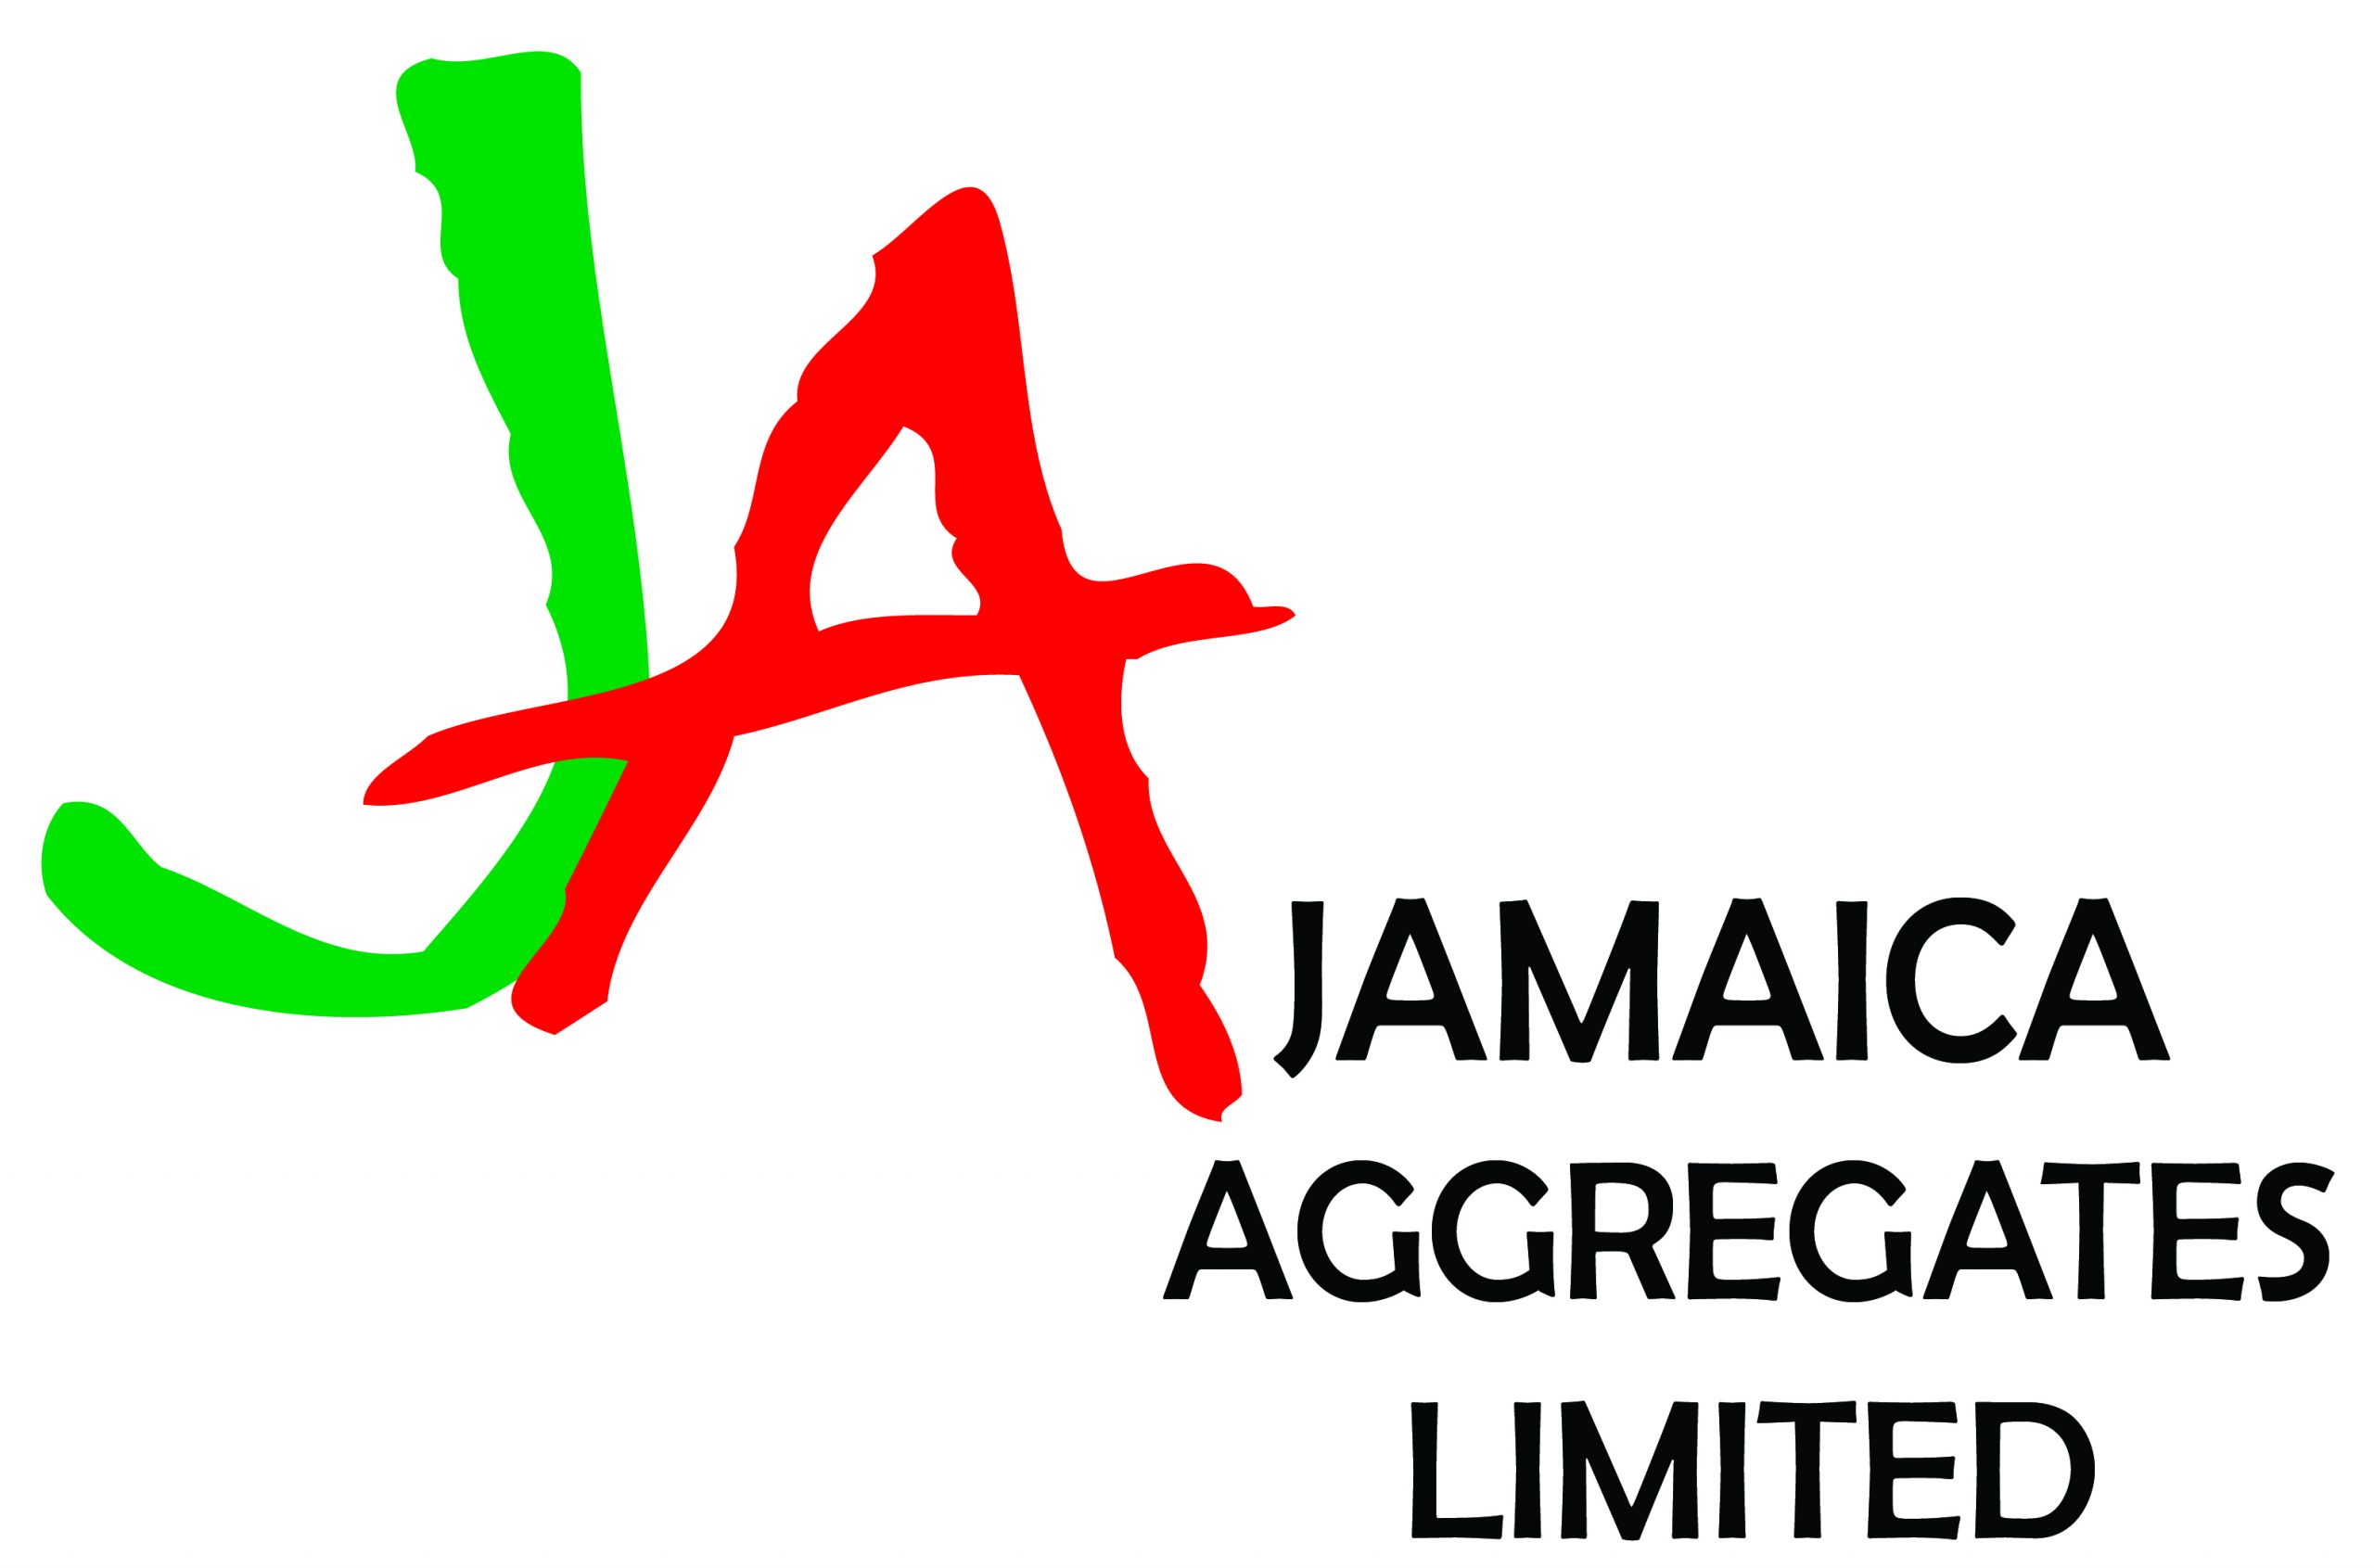 Jamaica Aggregates Limited contact number – High quality Logo